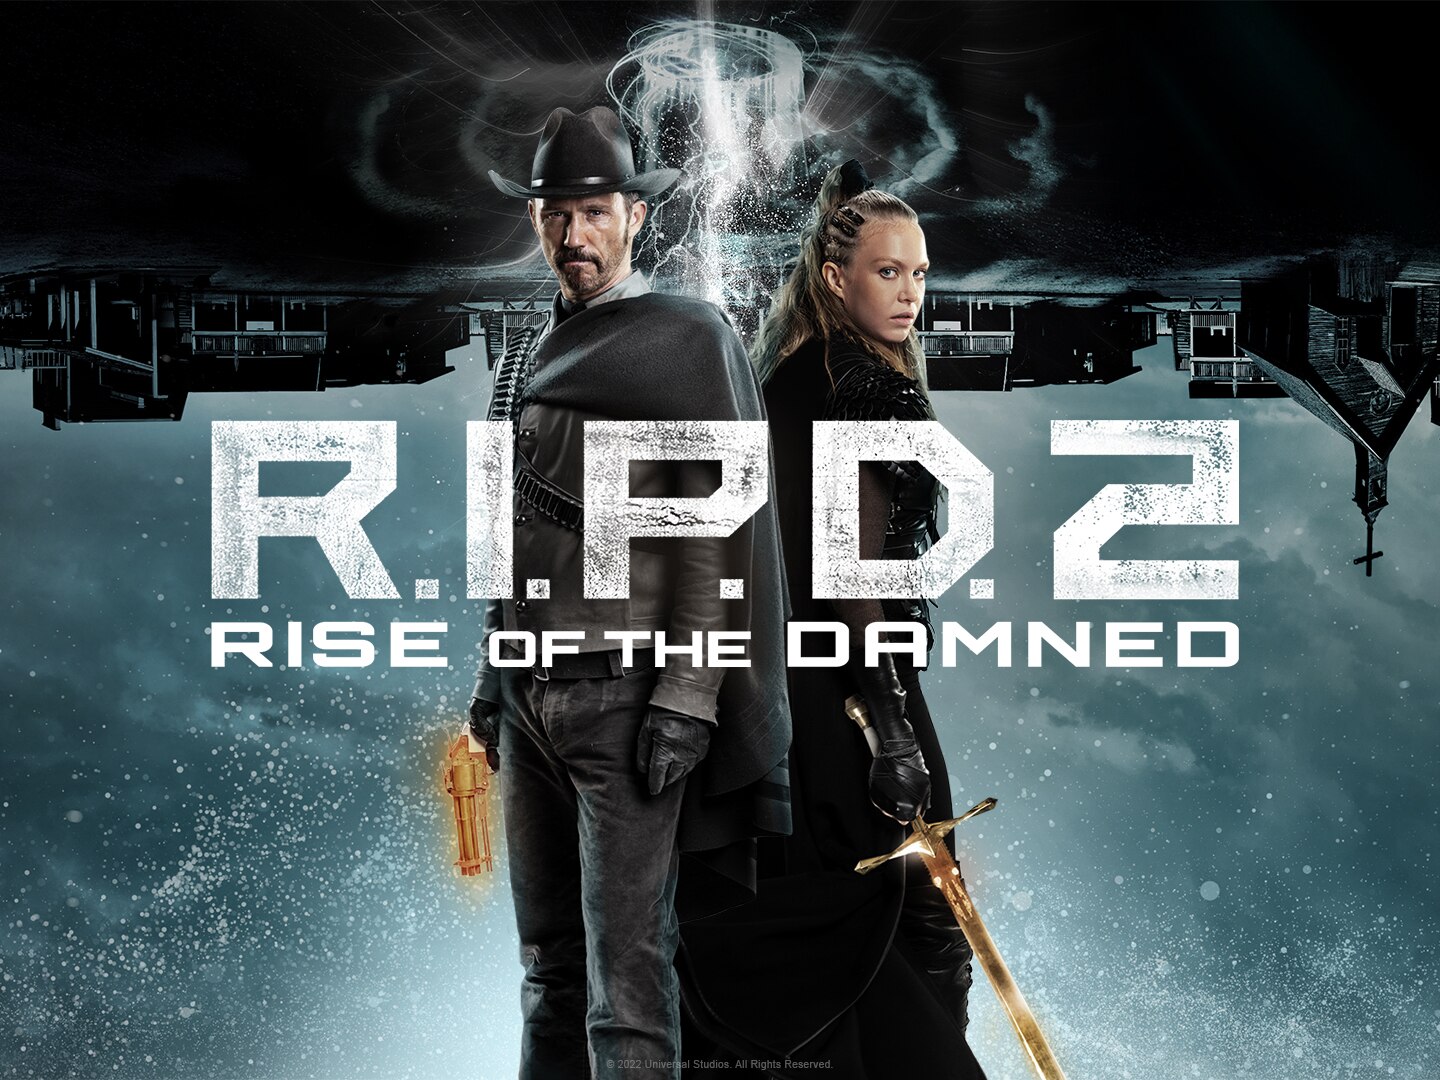 R.I.P.D. 2: Rise of the Damned Blu-Ray In-Store and Online